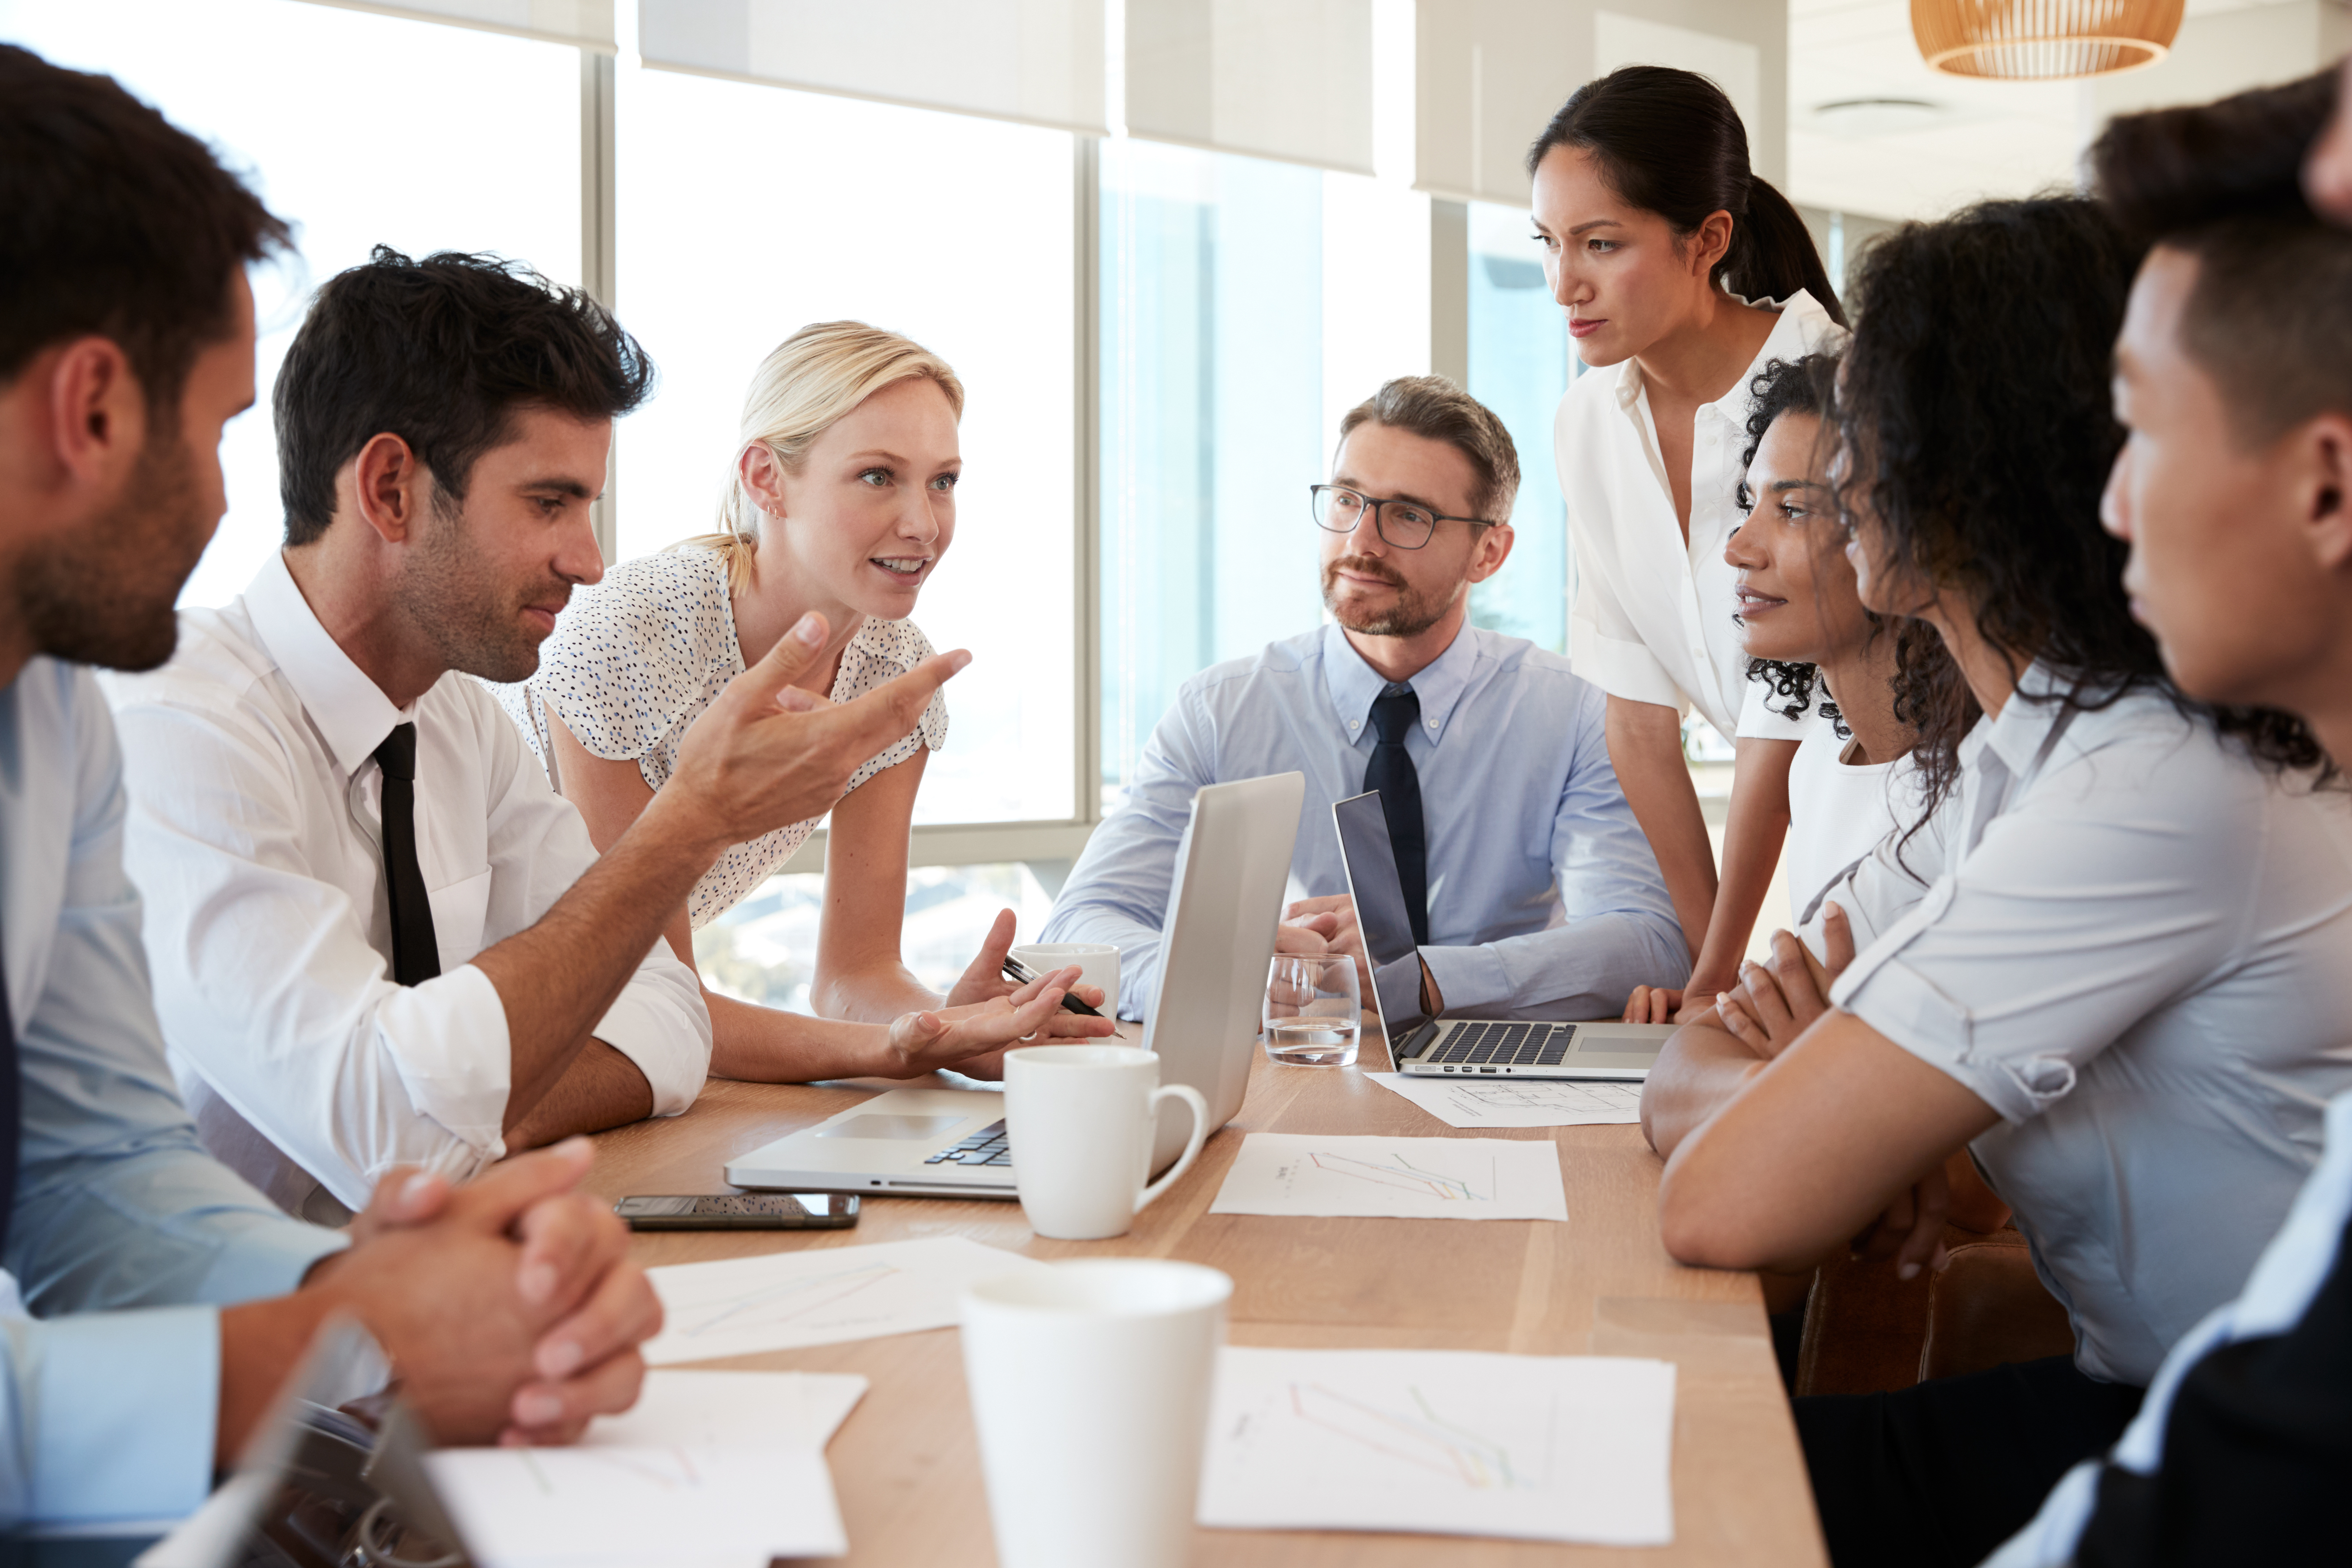 CEOs can inspire employees with a collaborative approach to business